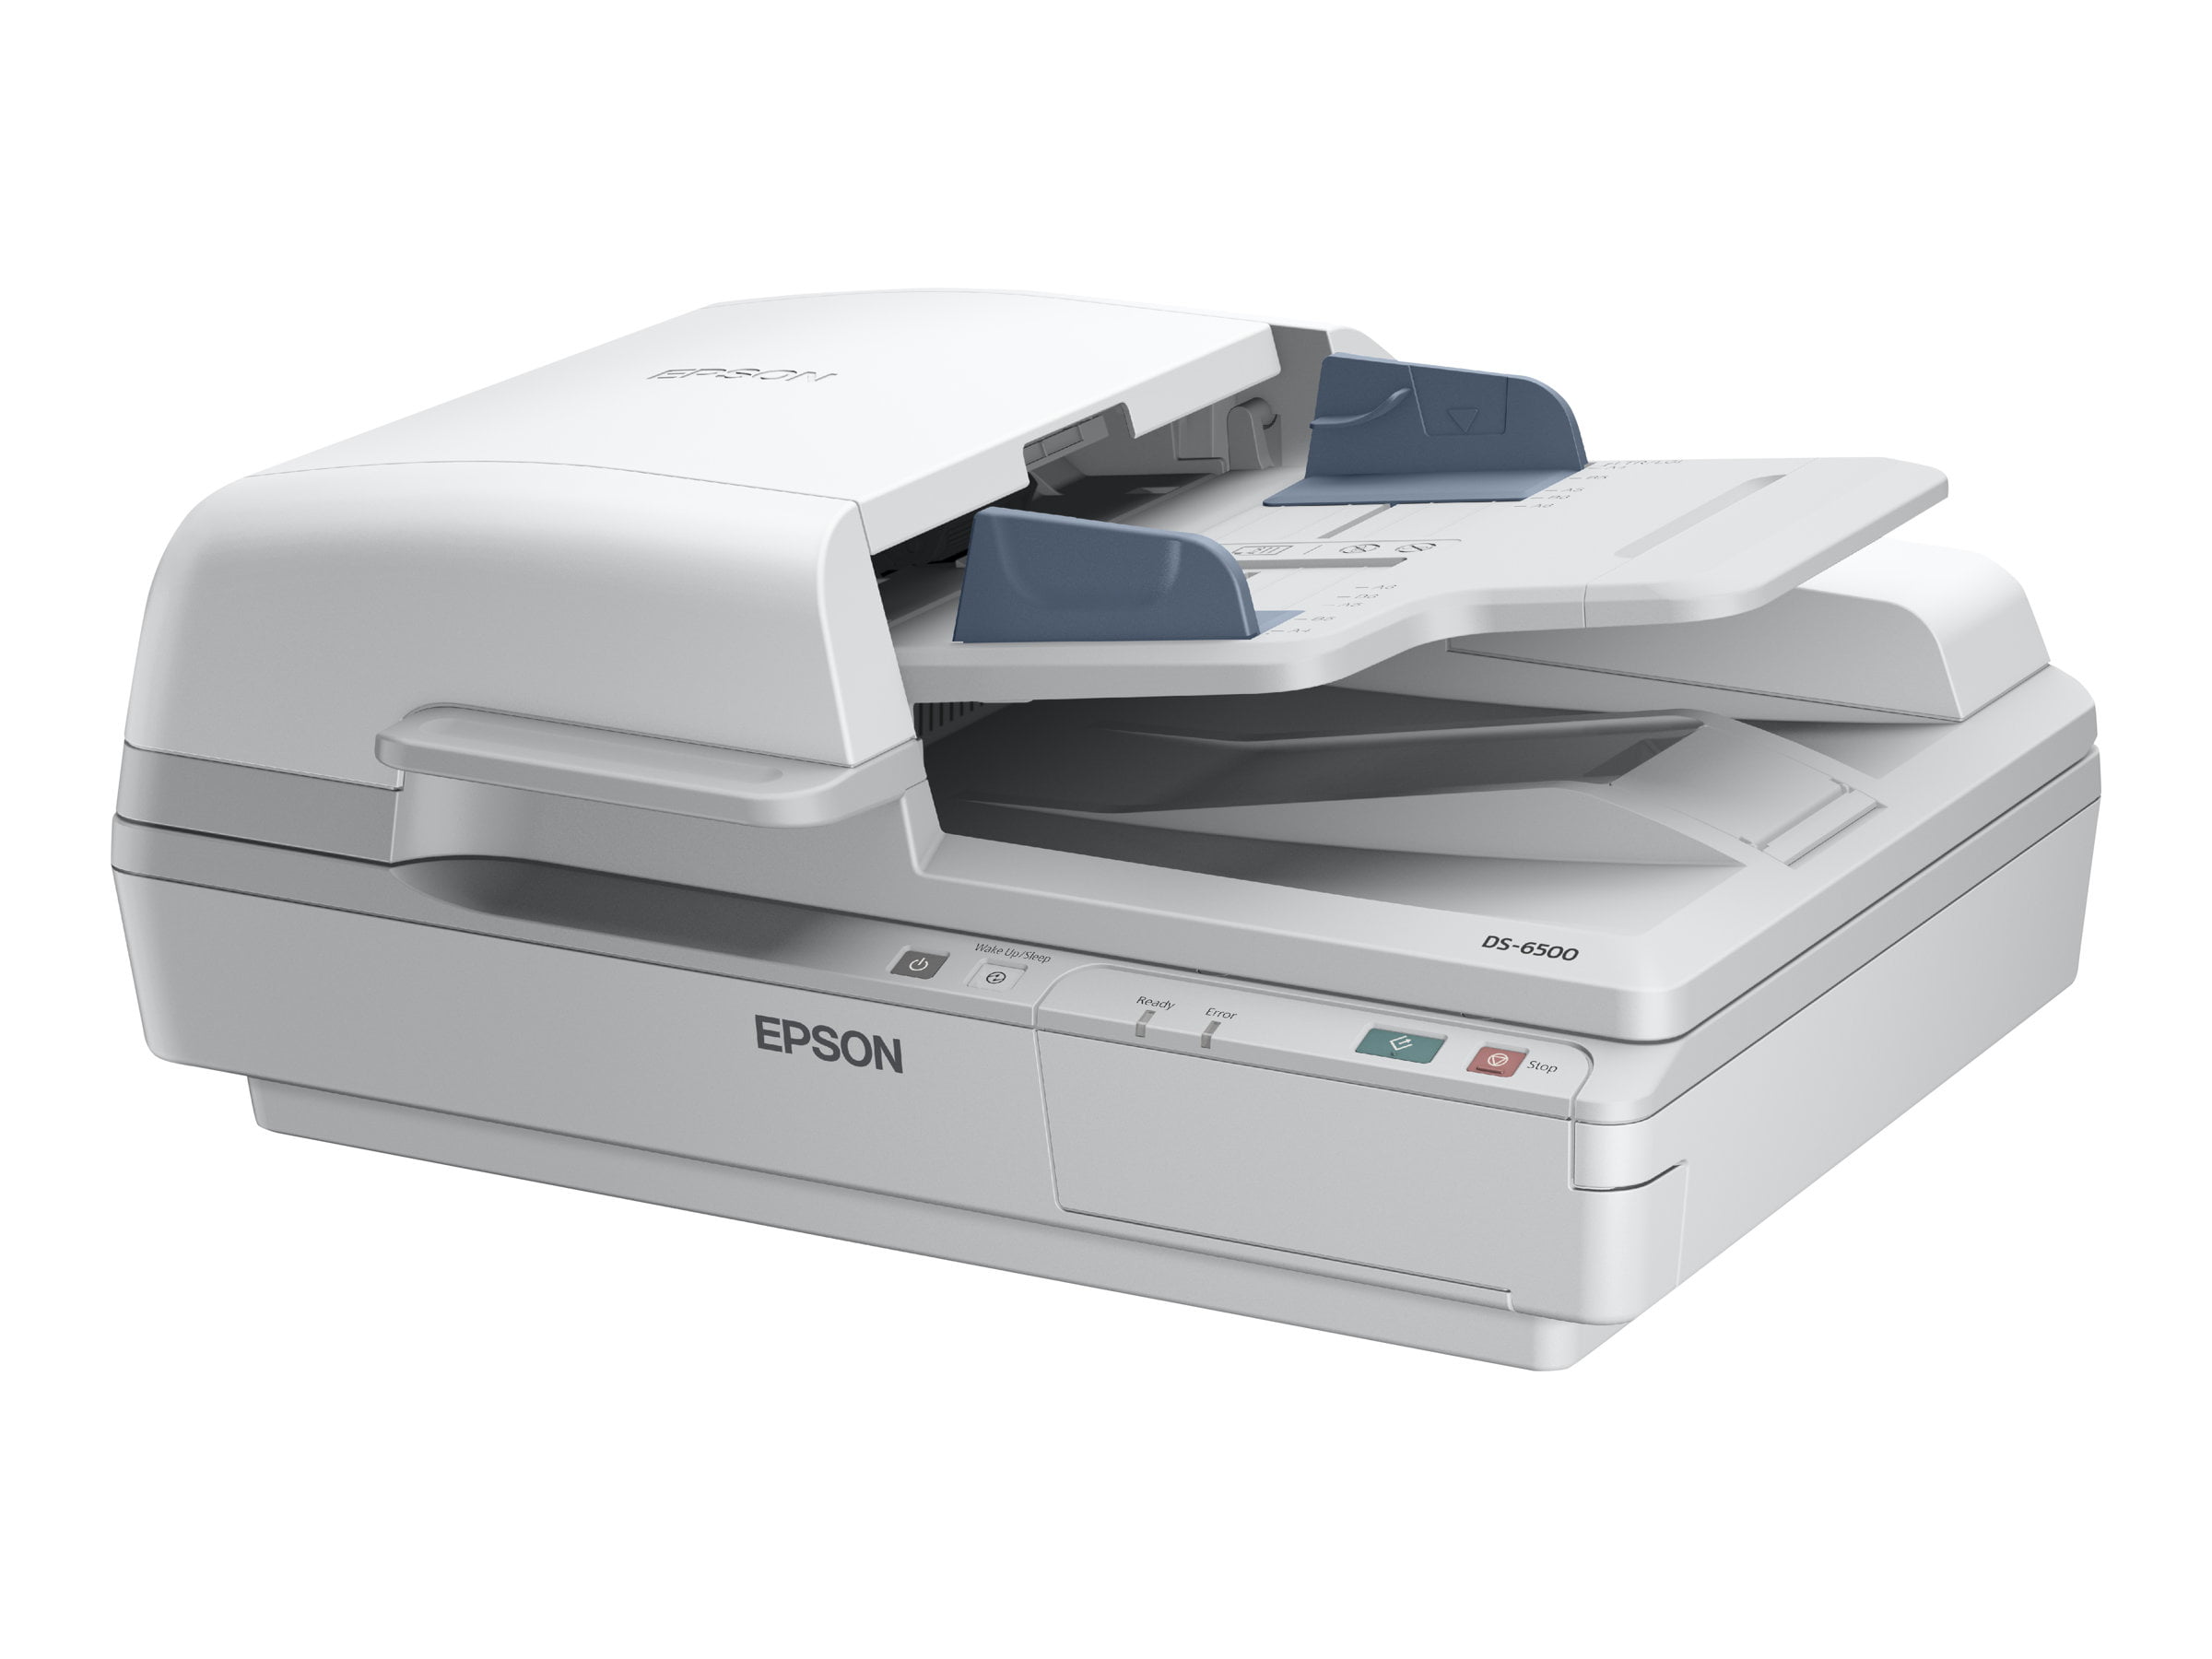 Epson DS-780N Network Color Document Scanner for PC and Mac 100-page Auto Document Feeder ADF Duplex Scanning